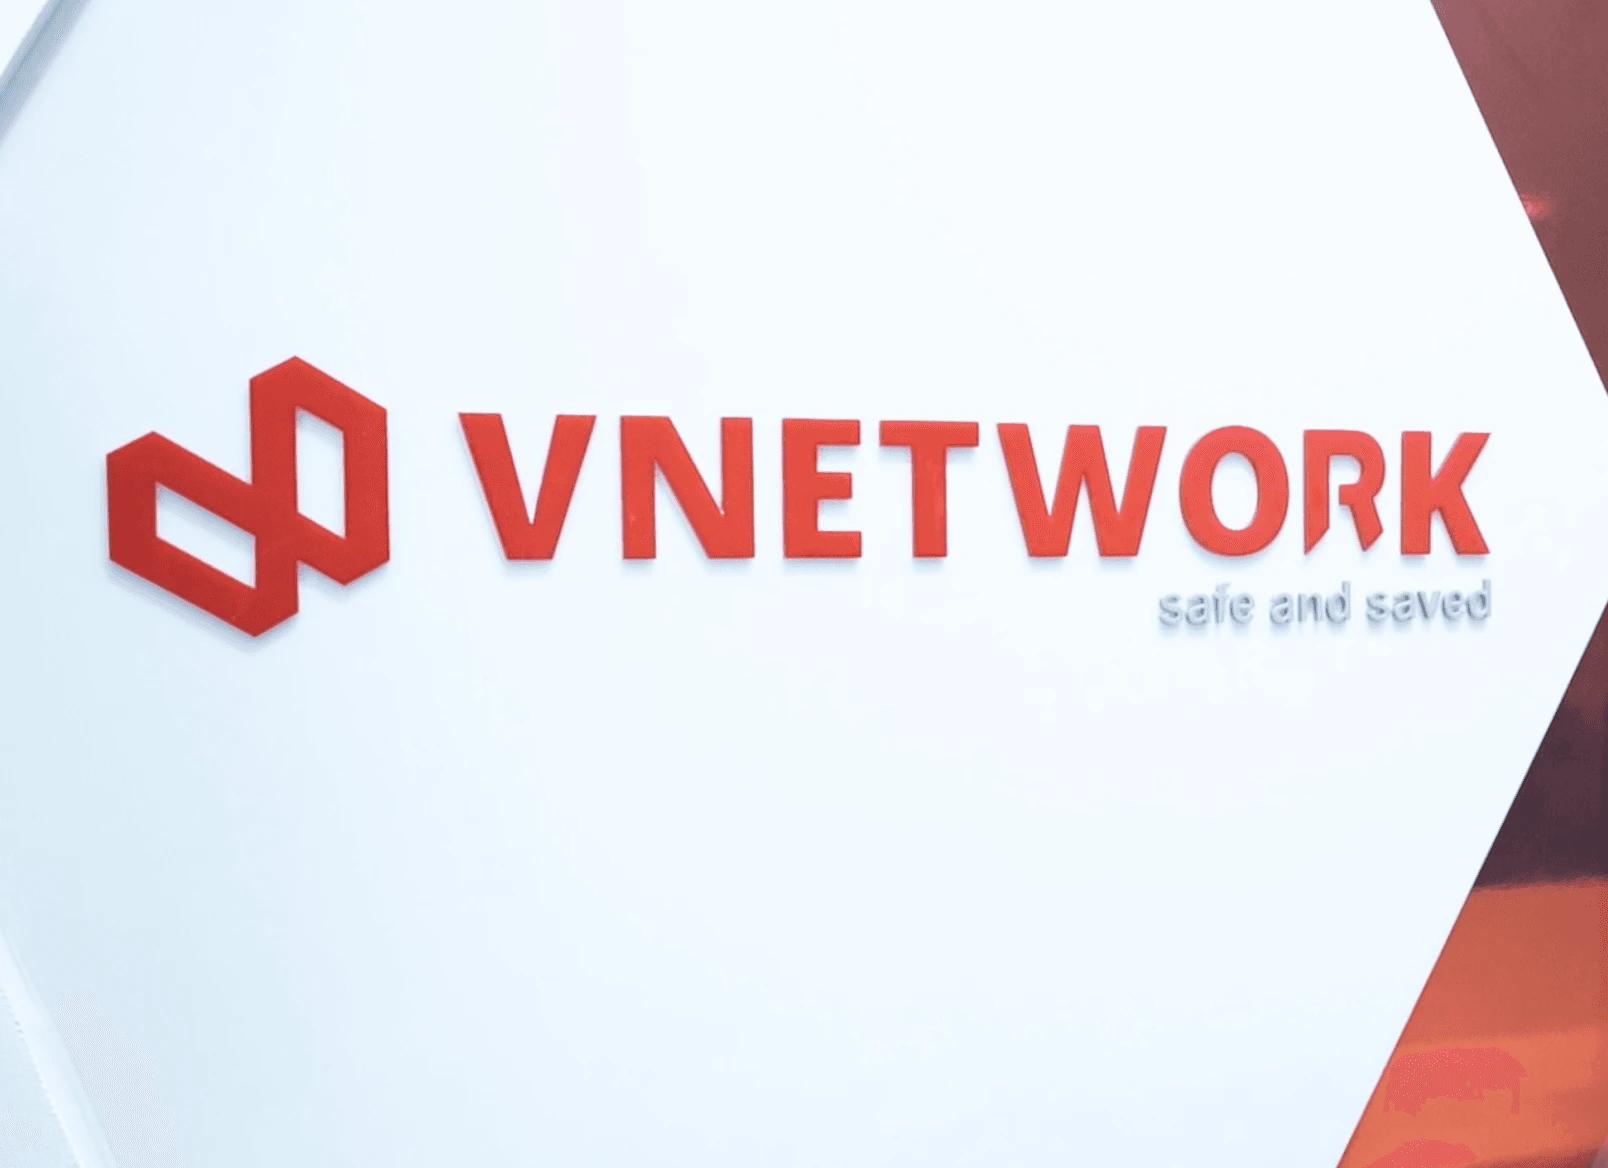 About VNETWORK